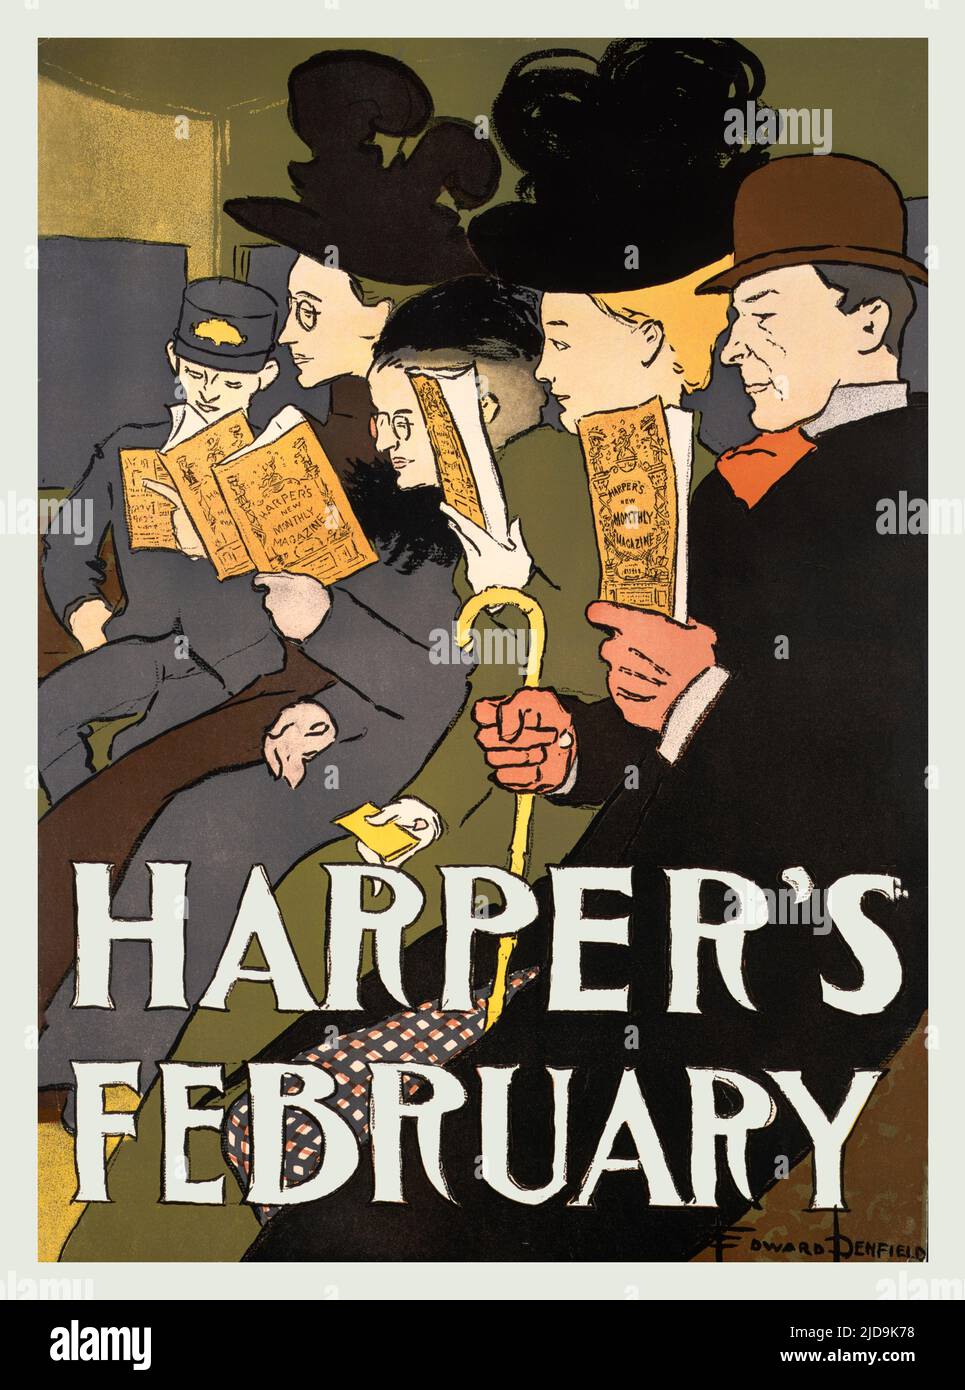 A turn of the 20th century illustration by Edward Penfield (1866-1925) considered by many to be the father of the American poster. Featuring a train carriage of people all reading Harper’s Magazine, the oldest general-interest monthly in America. Stock Photo